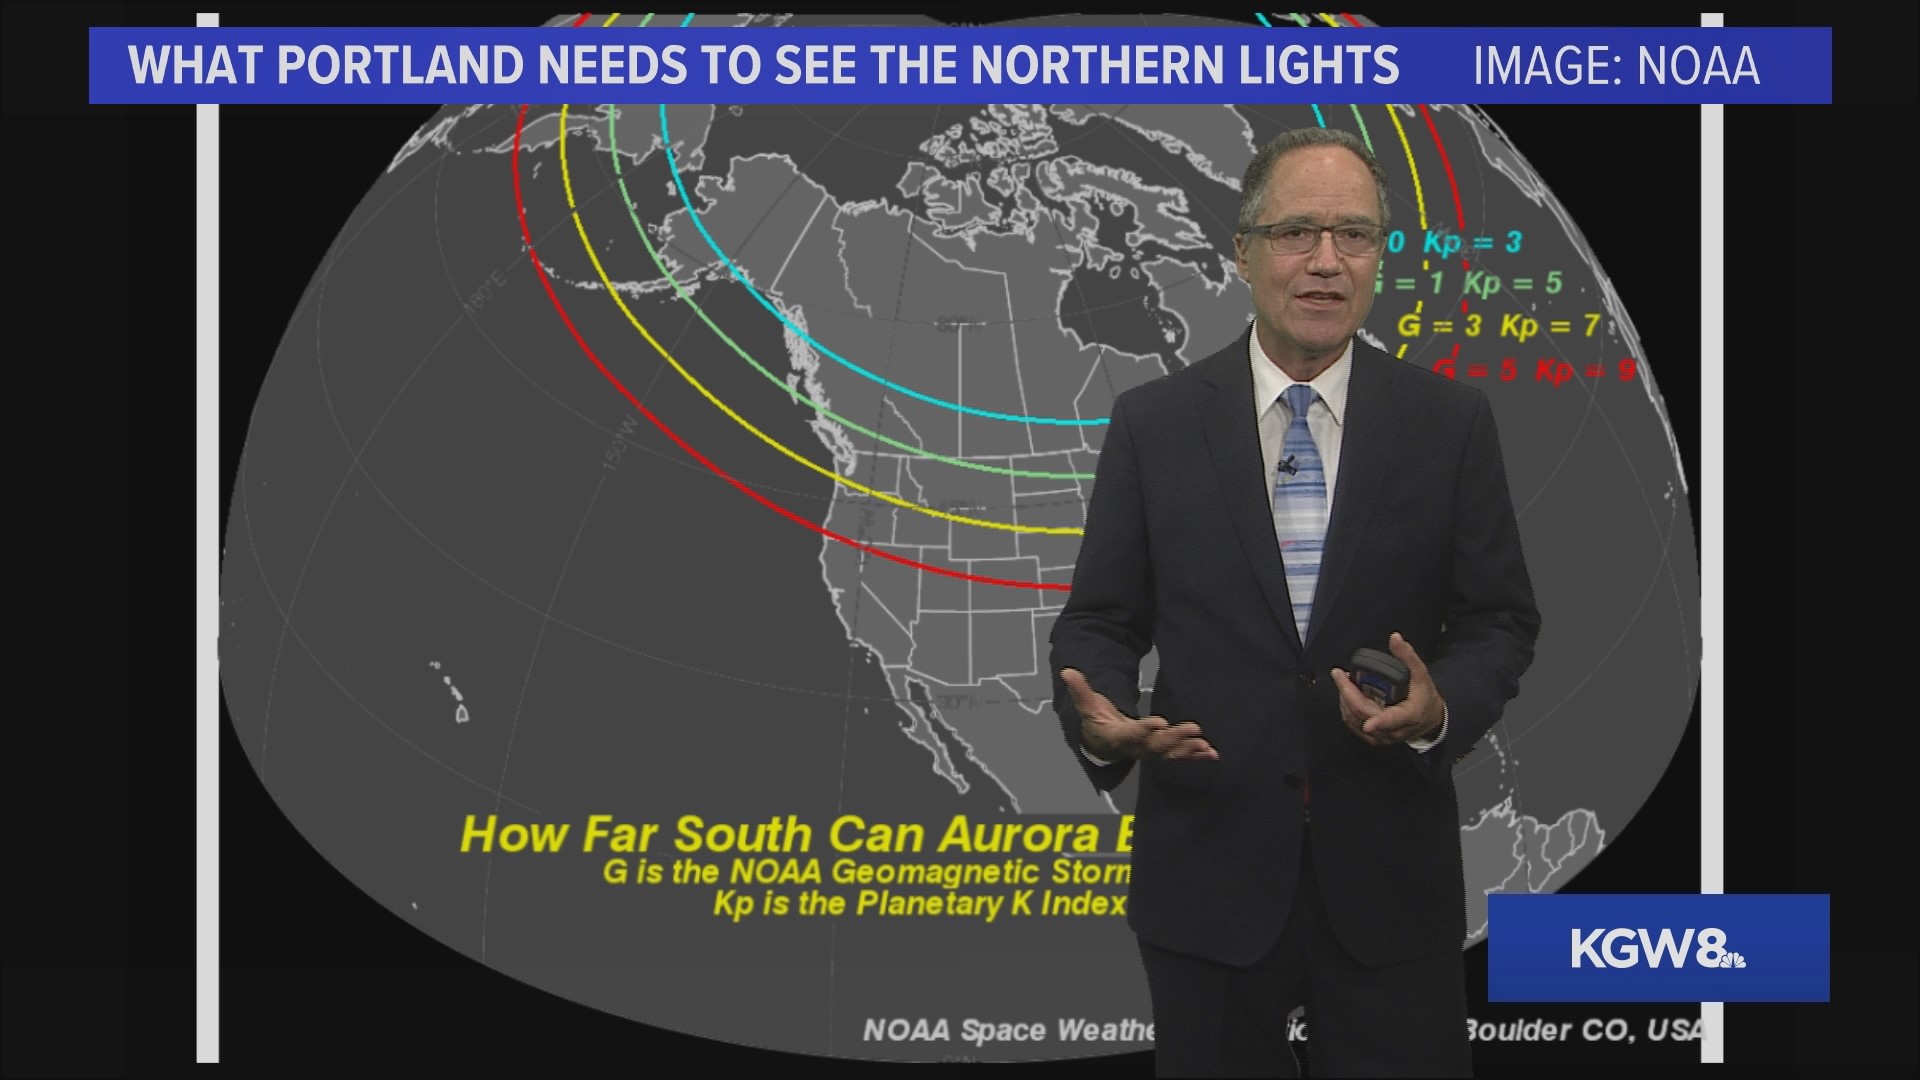 The Geophysical Institute at the University of Alaska at Fairbanks forecasted auroral activity in 17 states. But the Pacific Northwest isn't likely to see the lights